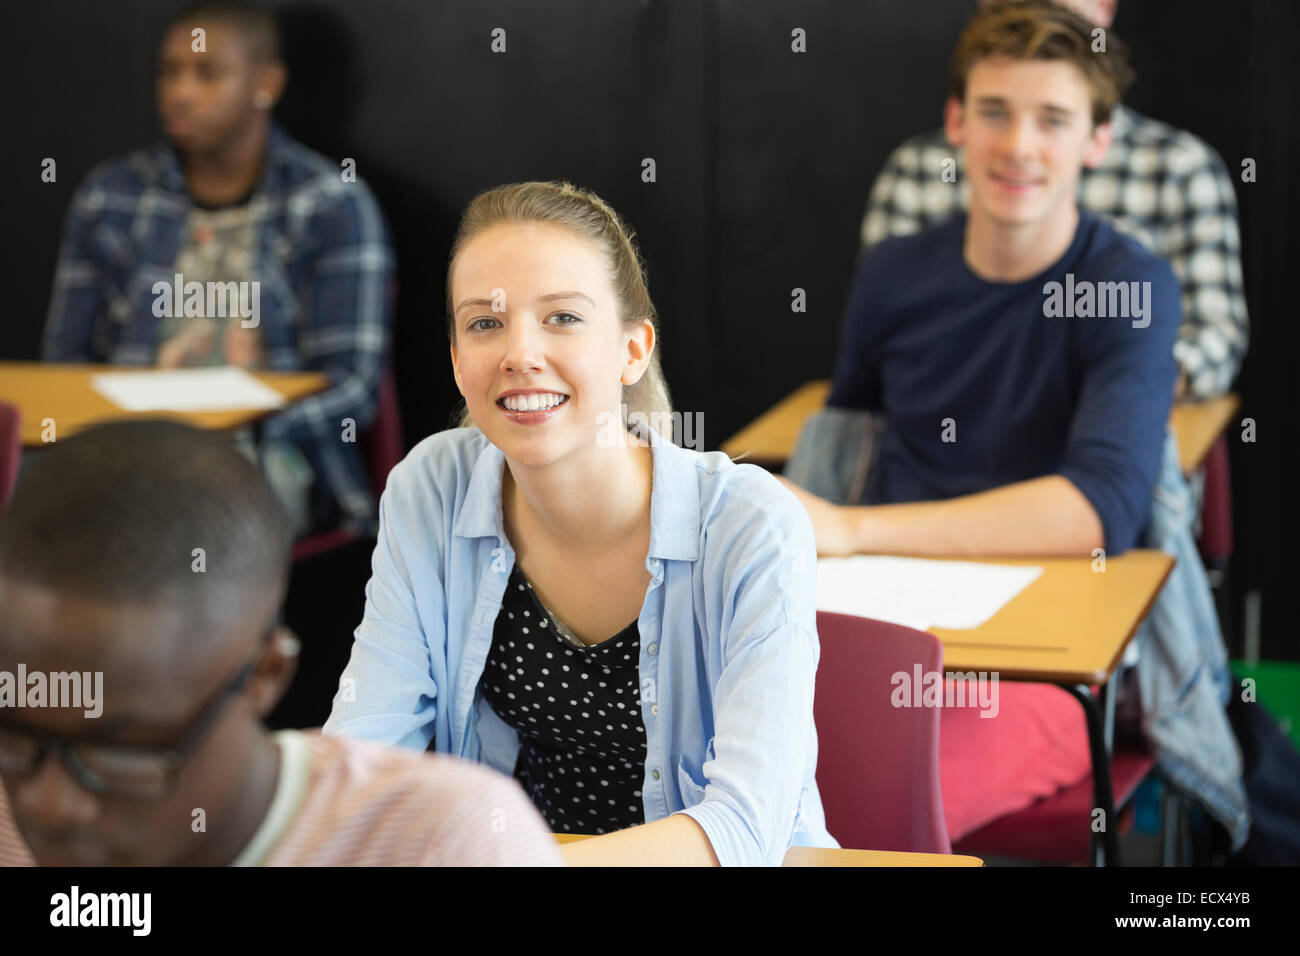 View of smiling students sitting at desks in classroom Stock Photo